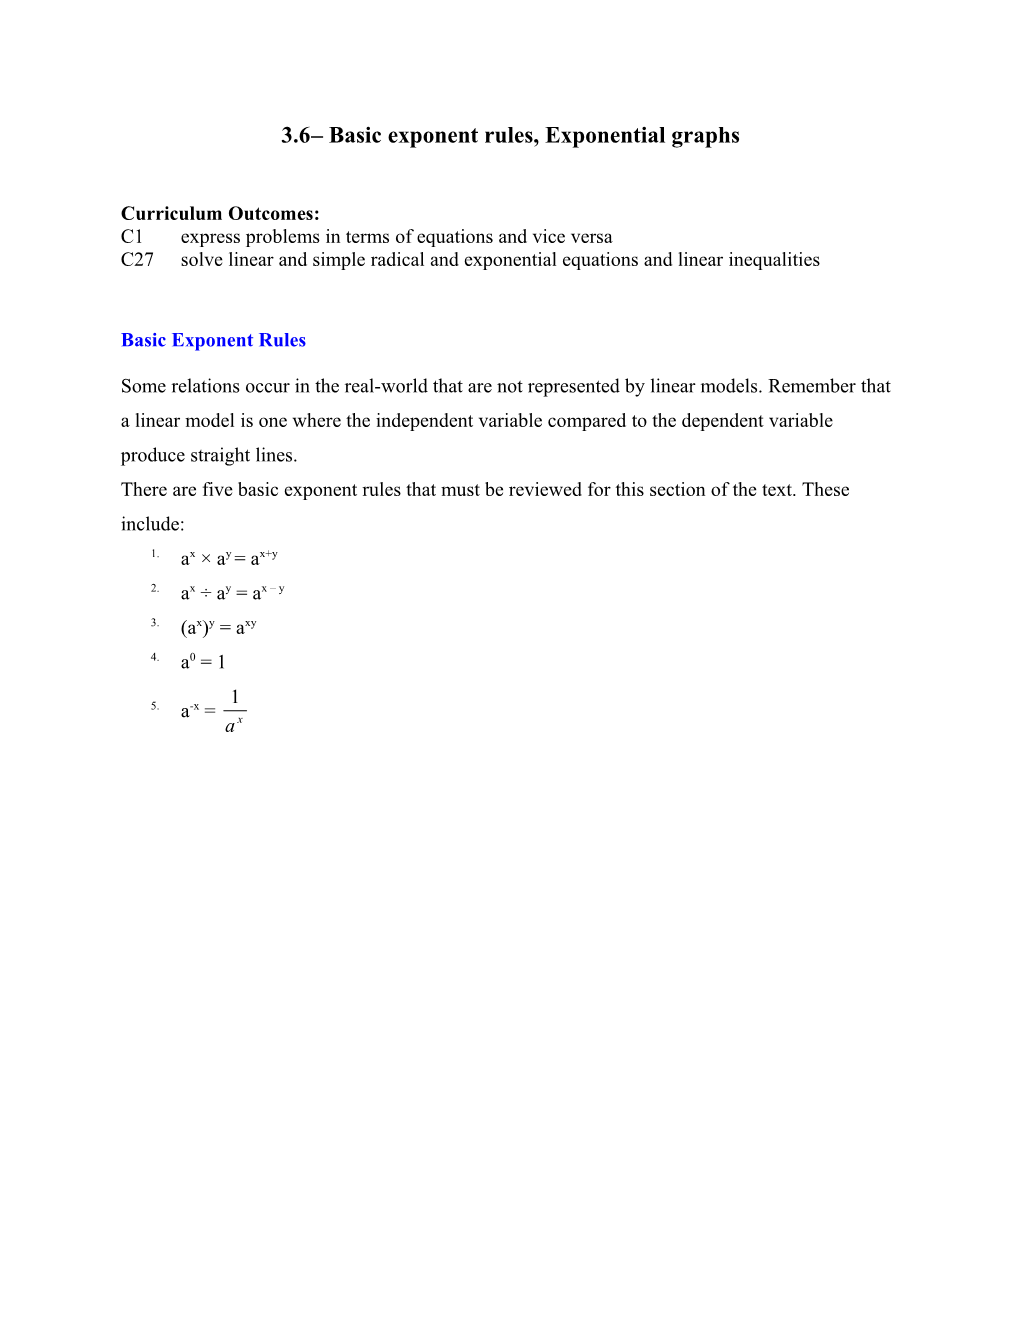 3.6 Basic Exponent Rules, Exponential Graphs